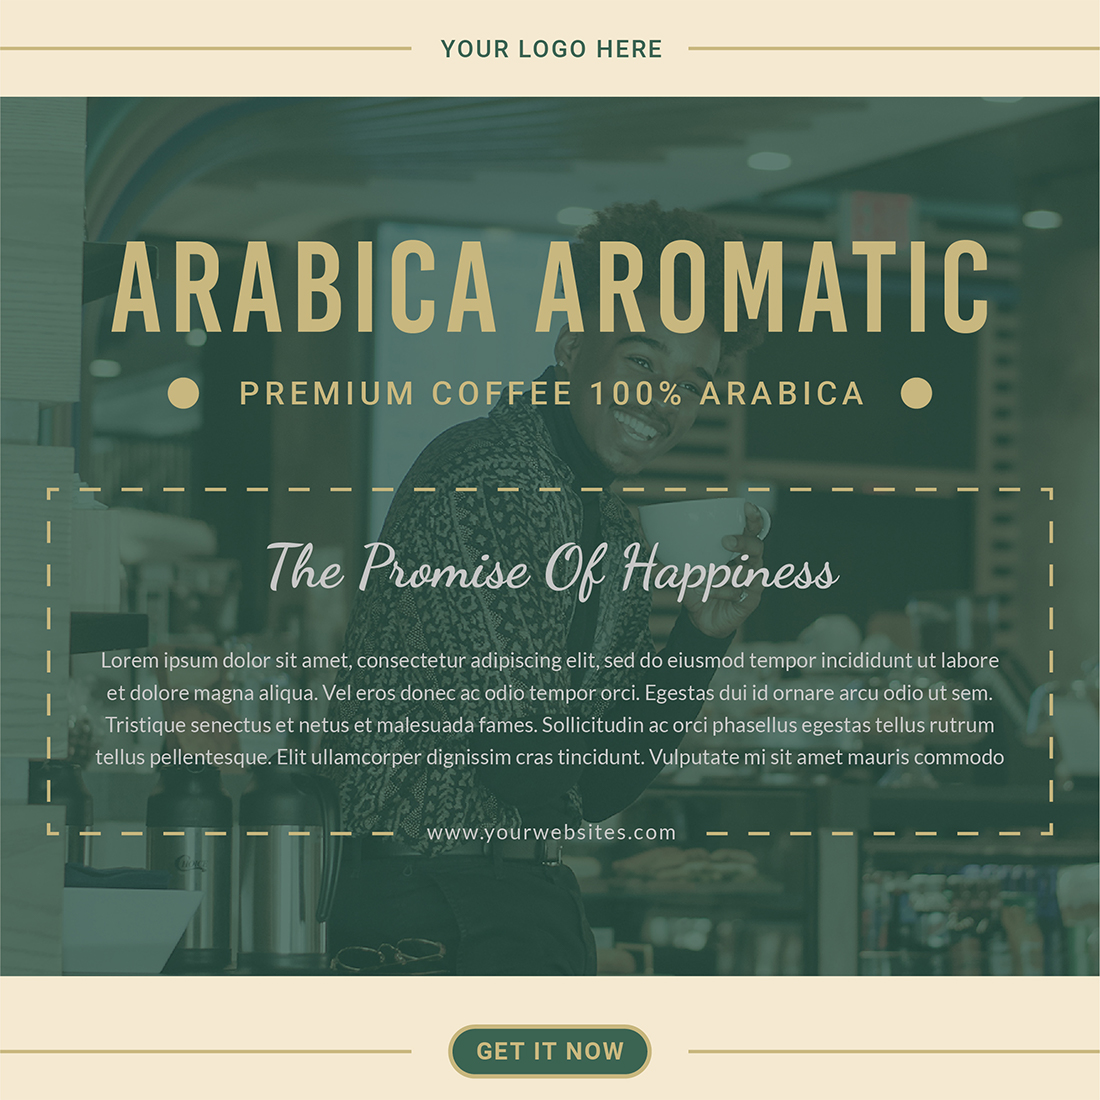 Arabica aromatic with Coffee Shop & Cafe Pack Social Media Post Templates.